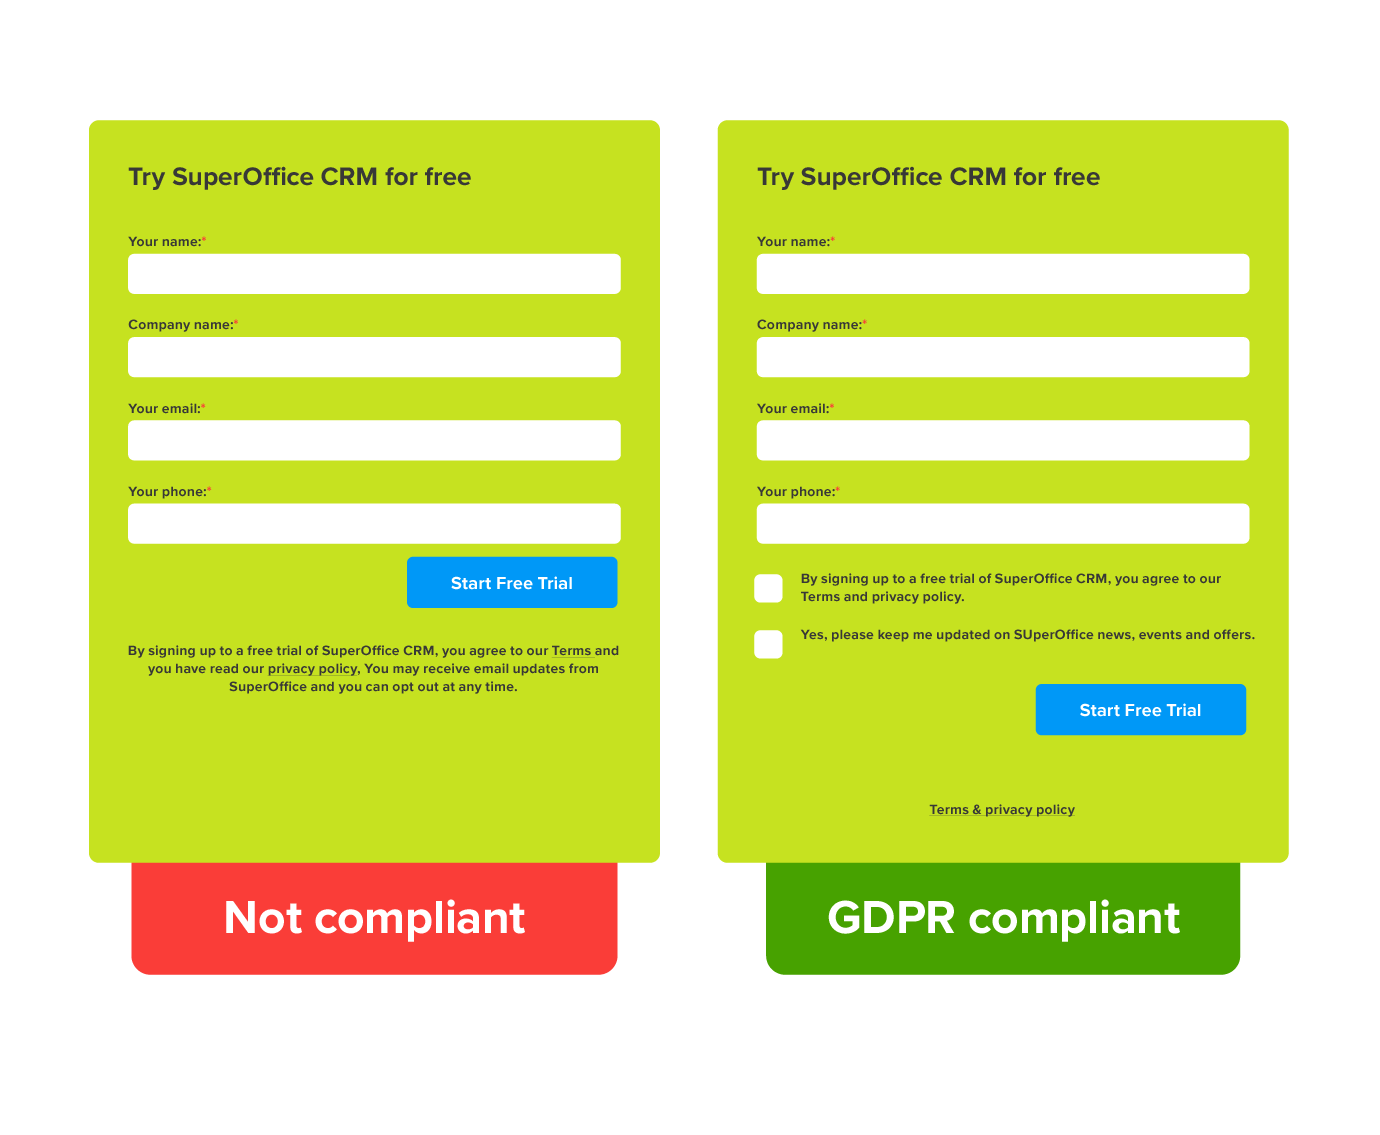 GDPR compliant forms on website